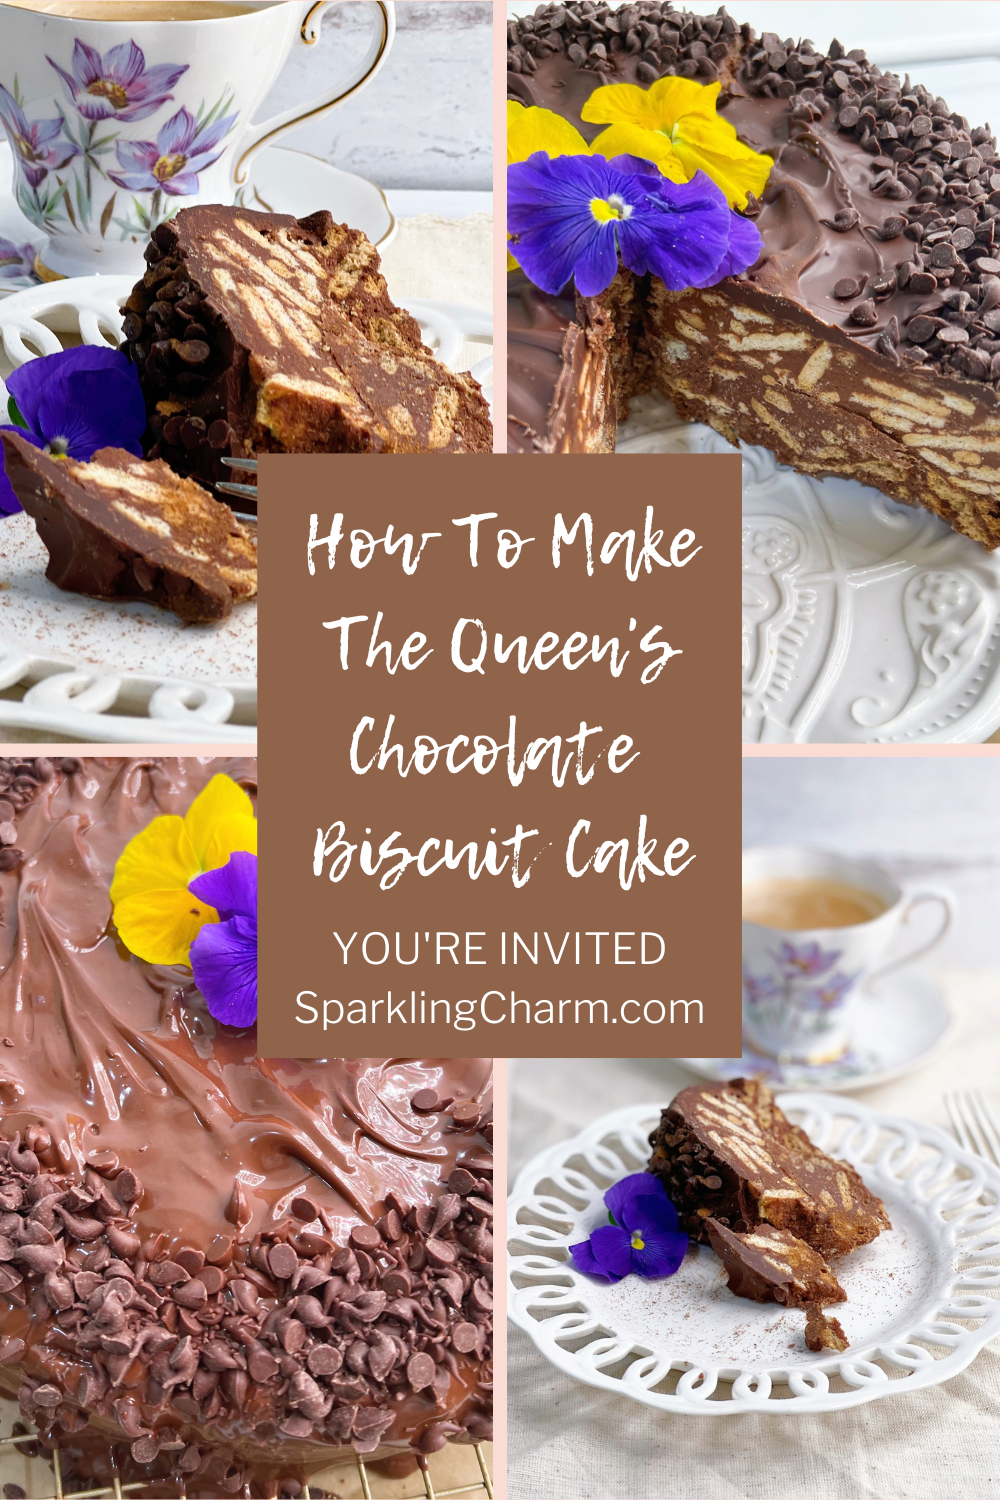 How To Make Chocolate Biscuit Cake